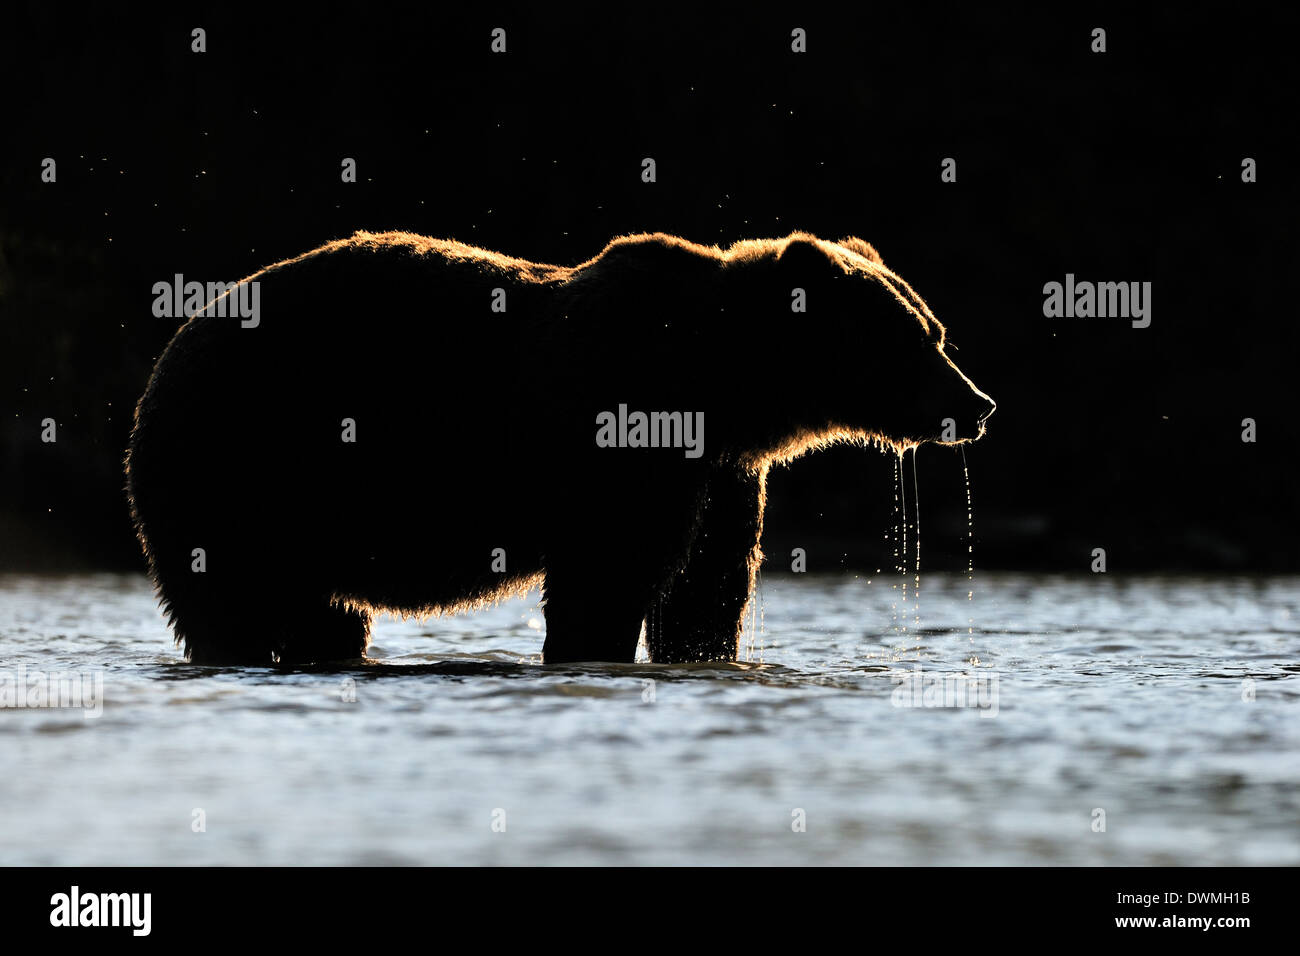 Grizzly bear (Ursus arctos horribilis) fishing in water with back light at sunset. Stock Photo